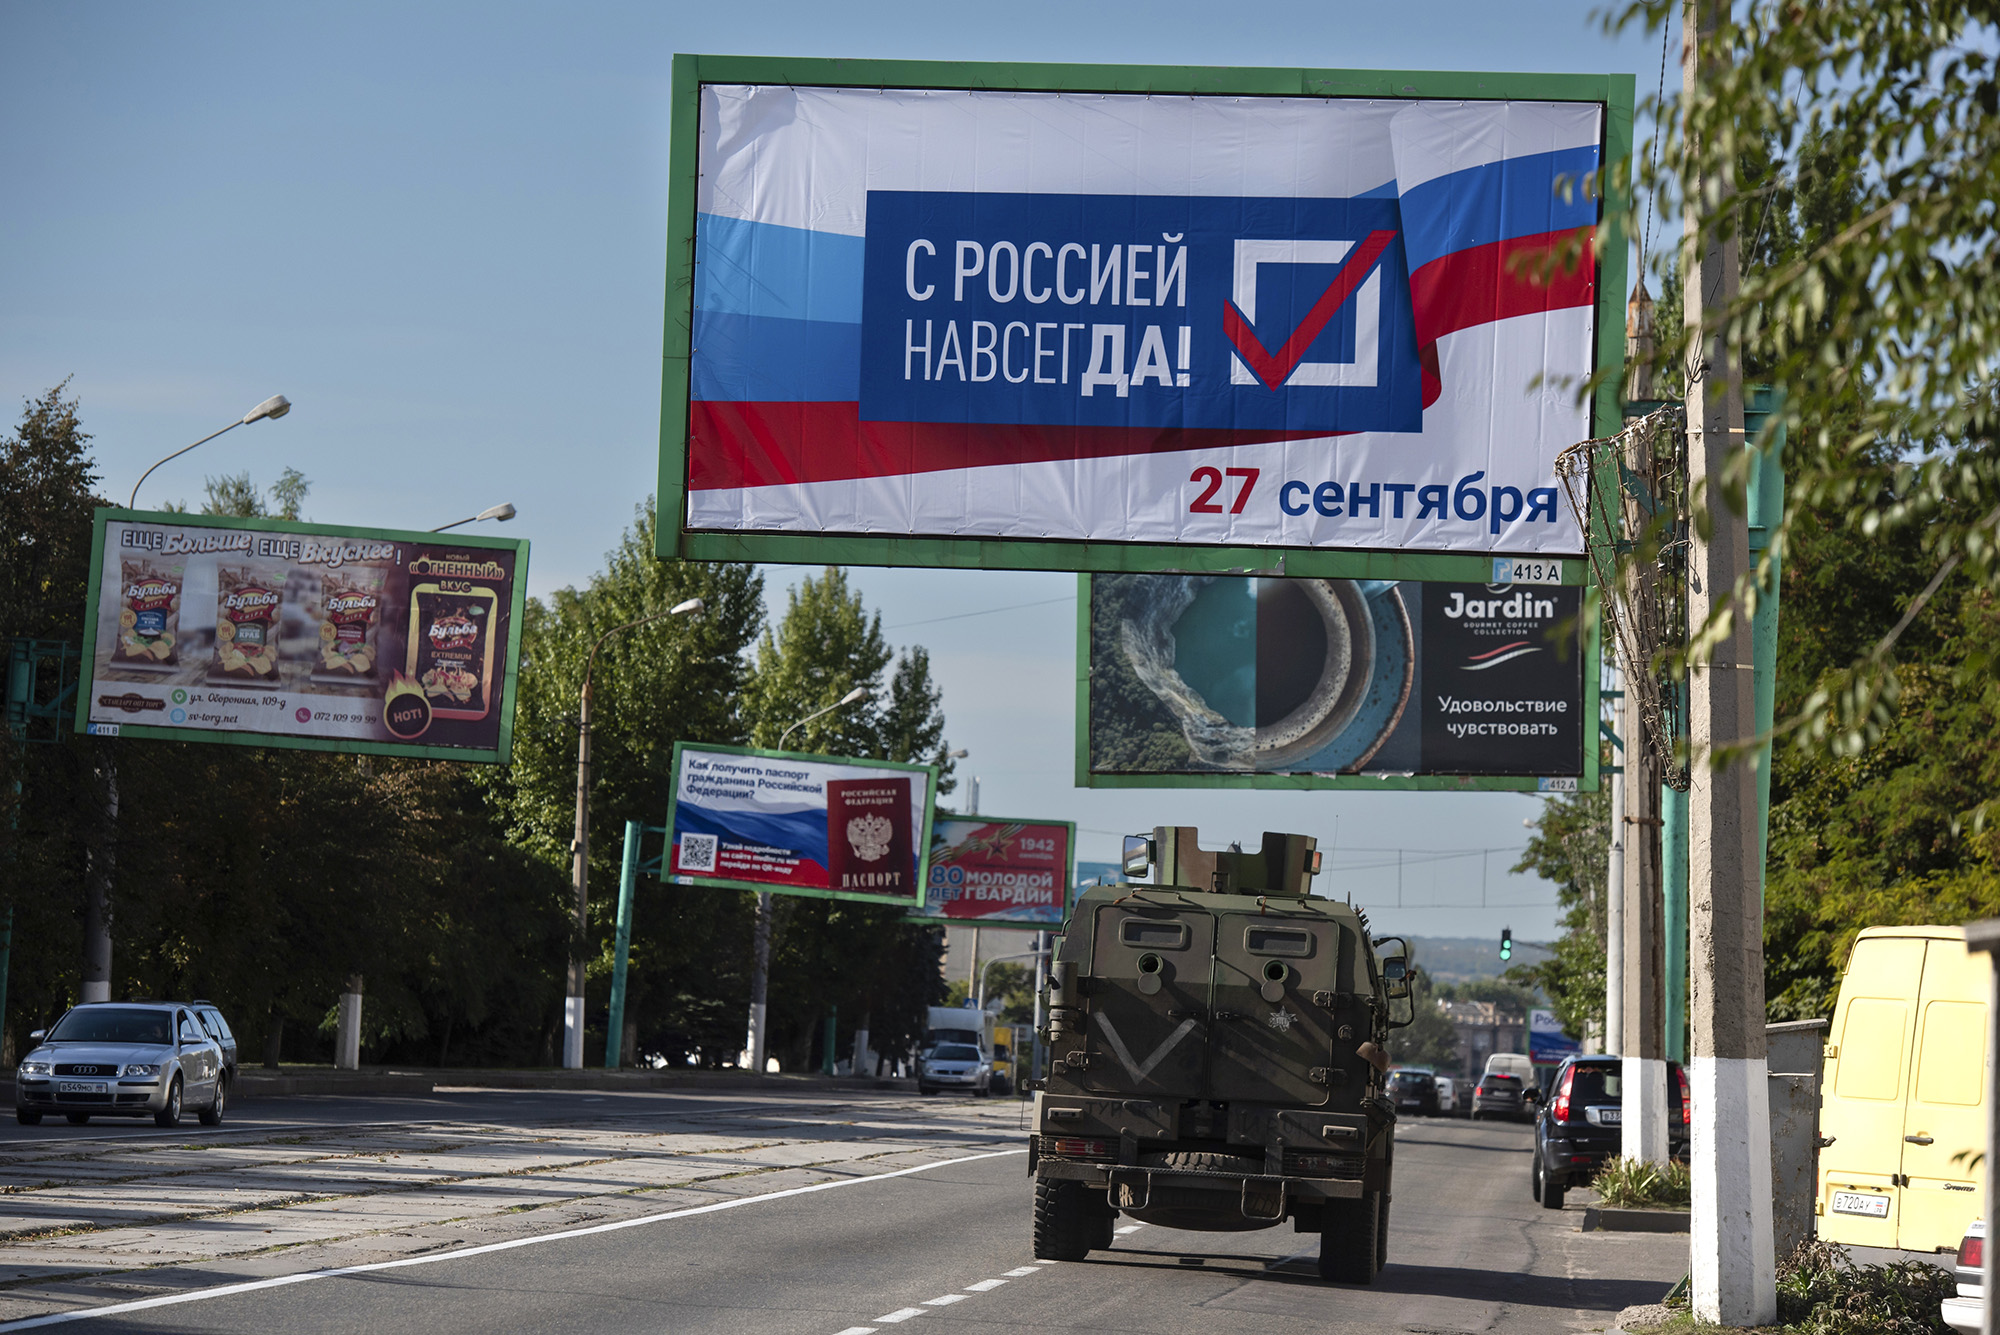 A military vehicle drives along a street with a billboard reading "With Russia forever, September 27" prior to a referendum in Luhansk, eastern Ukraine, on September 22.